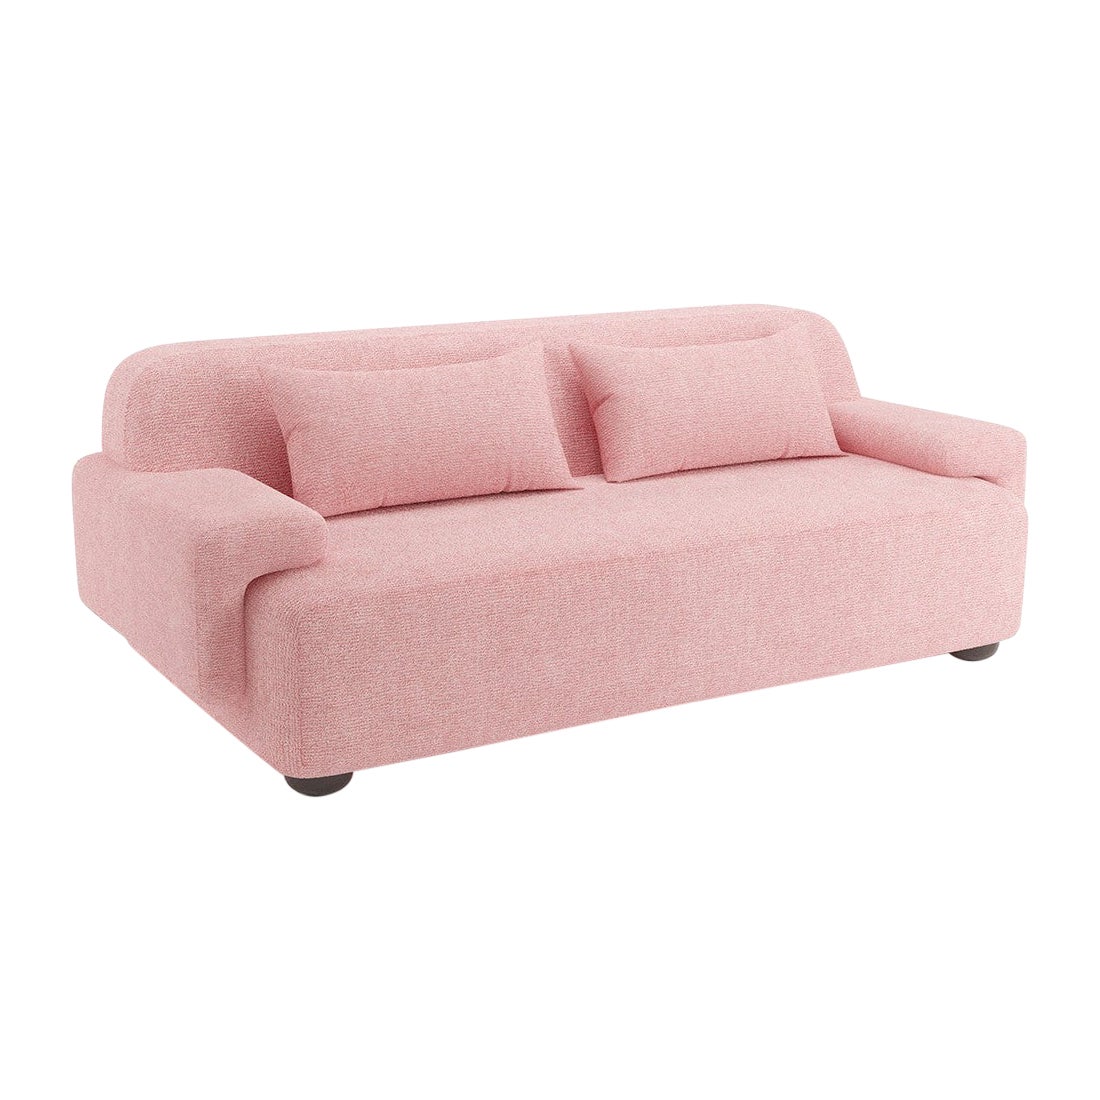 Popus Editions Lena 2.5 Seater Sofa in Pink Megeve Fabric with Knit Effect